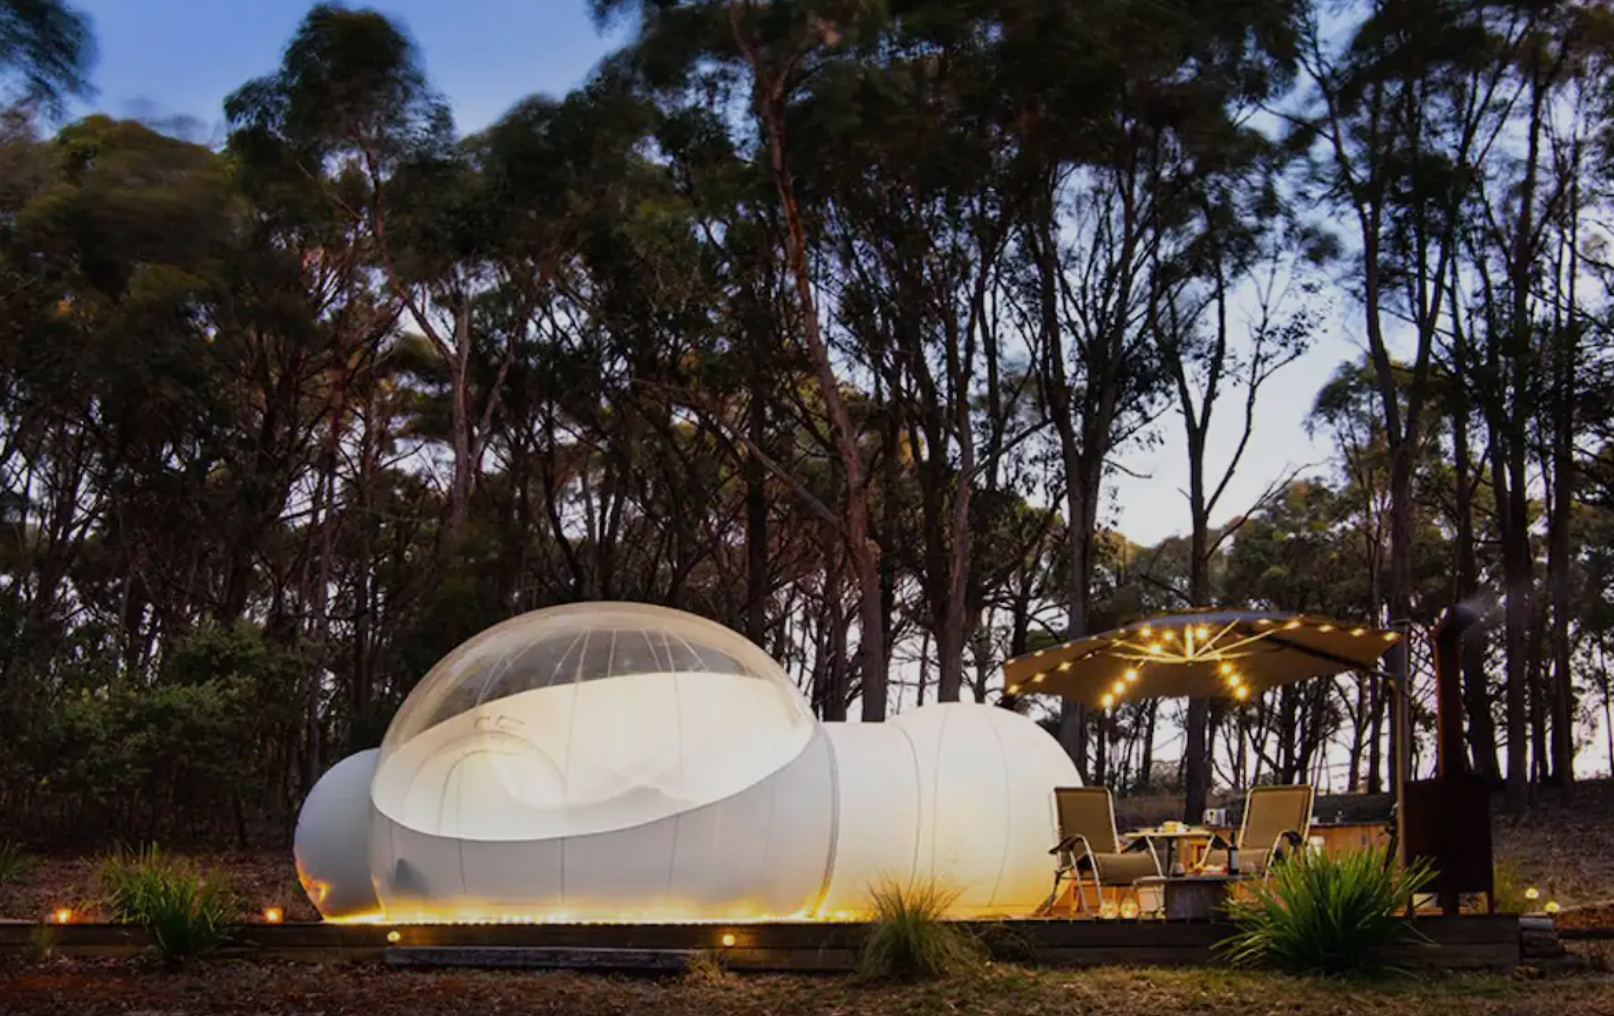 A moon-shaped bubble tent, some of the best glamping in Victoria